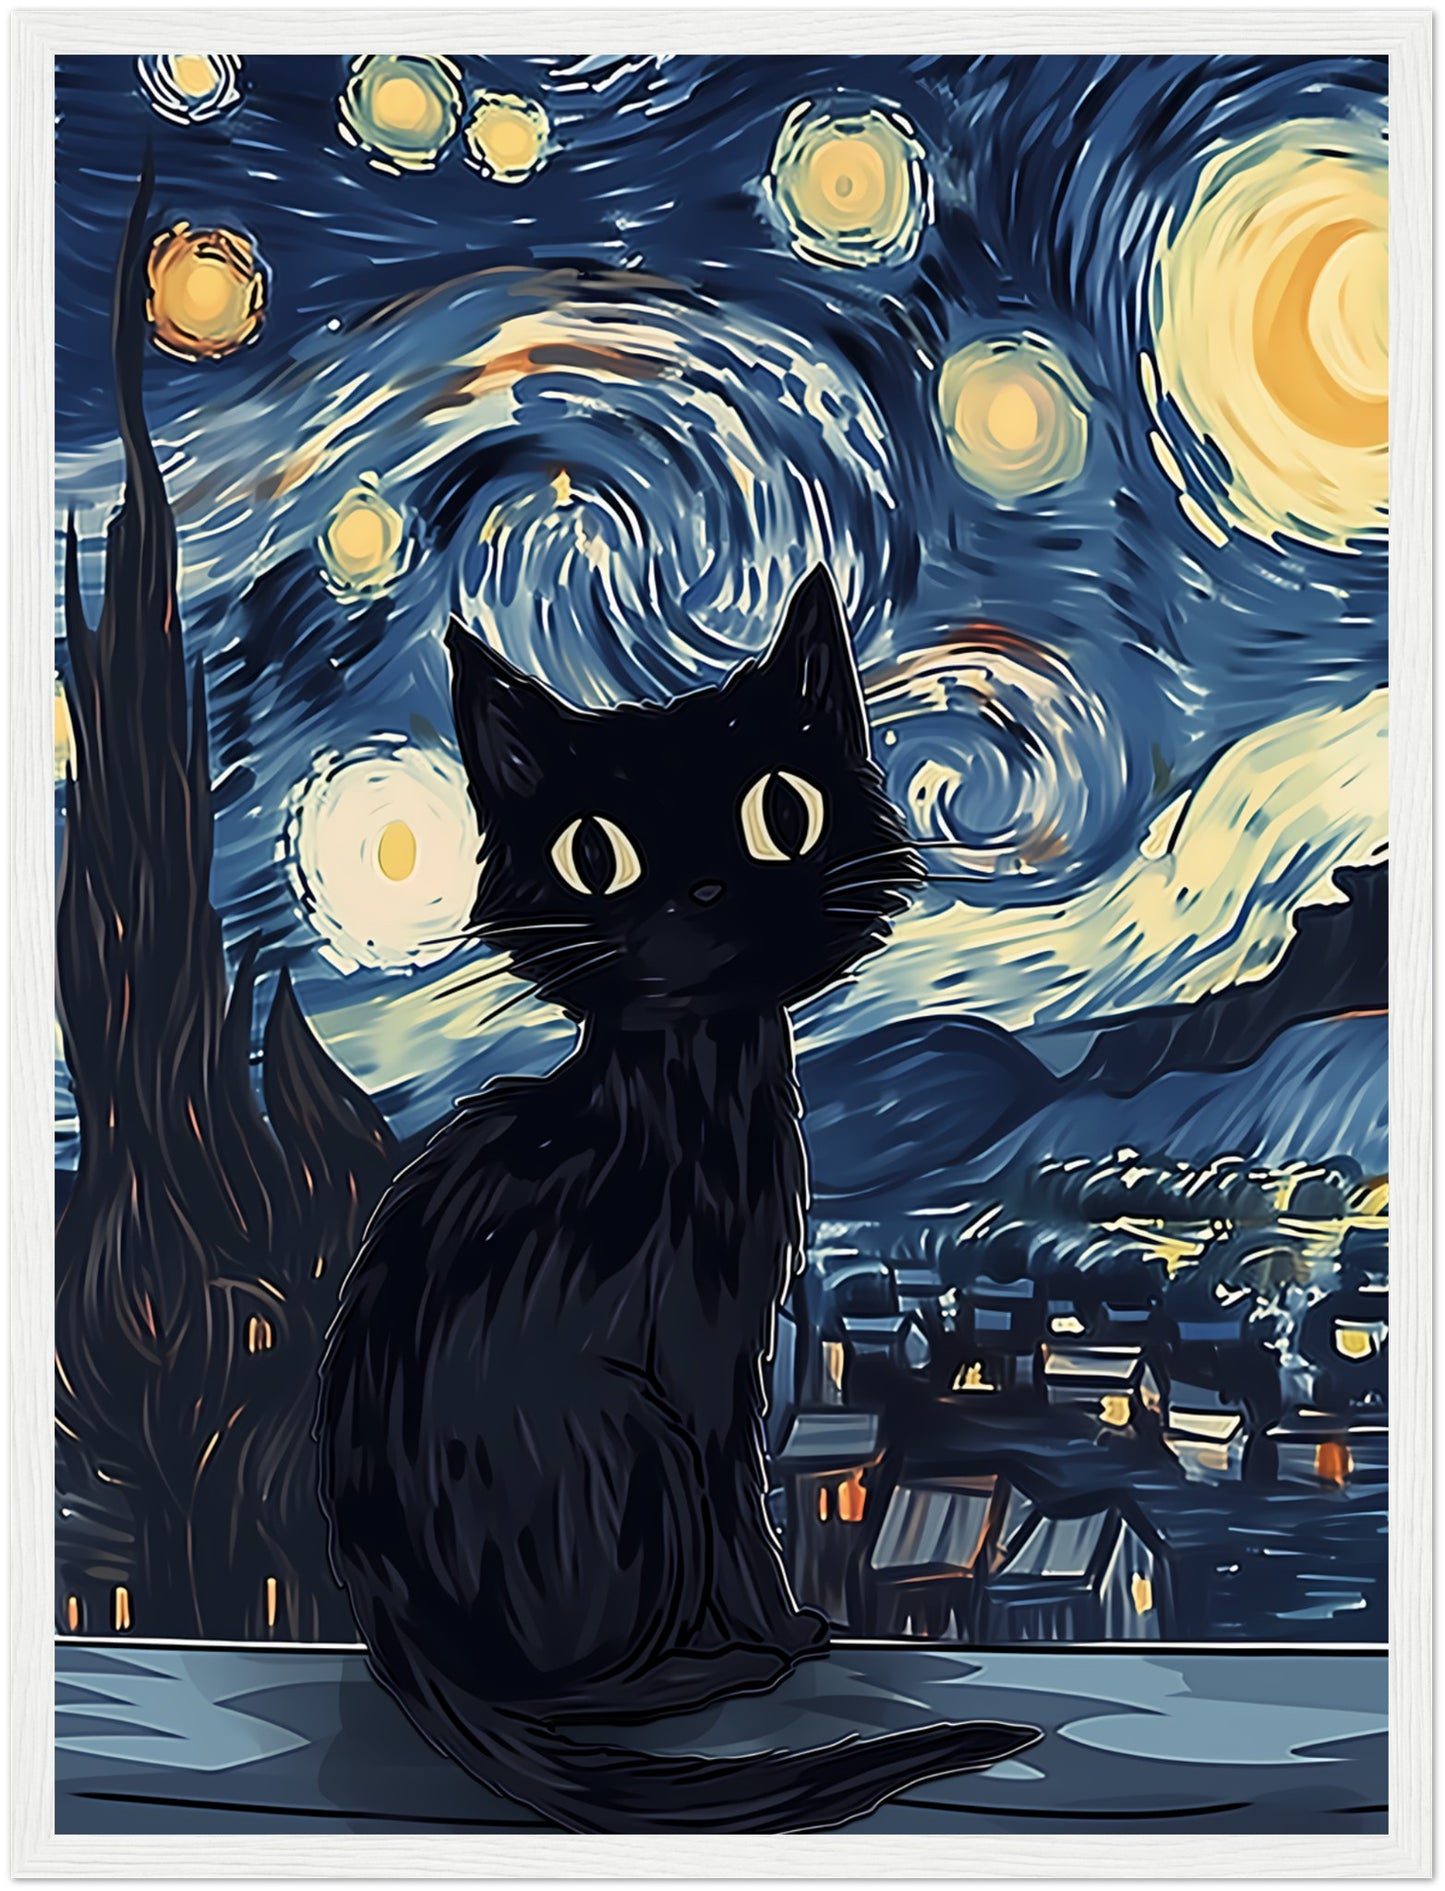 A stylized illustration of a black cat sitting in front of Van Gogh's Starry Night painting.